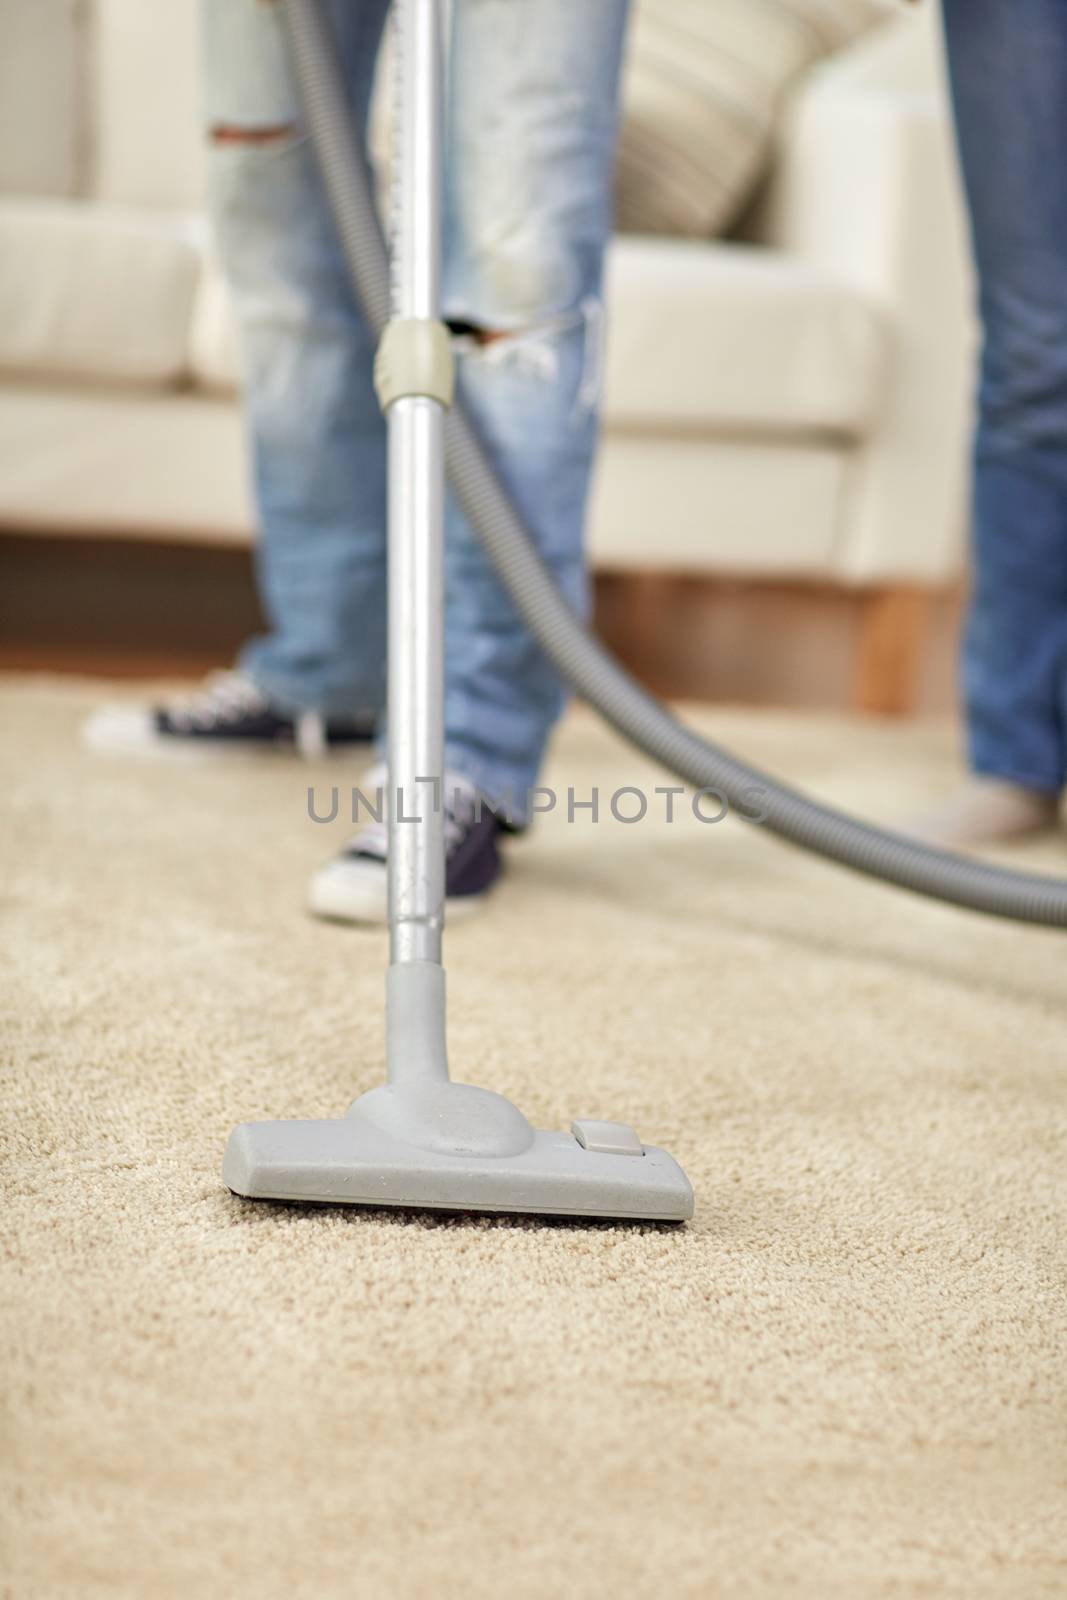 people, housework and housekeeping concept - close up of human legs and vacuum cleaner on carpet at home